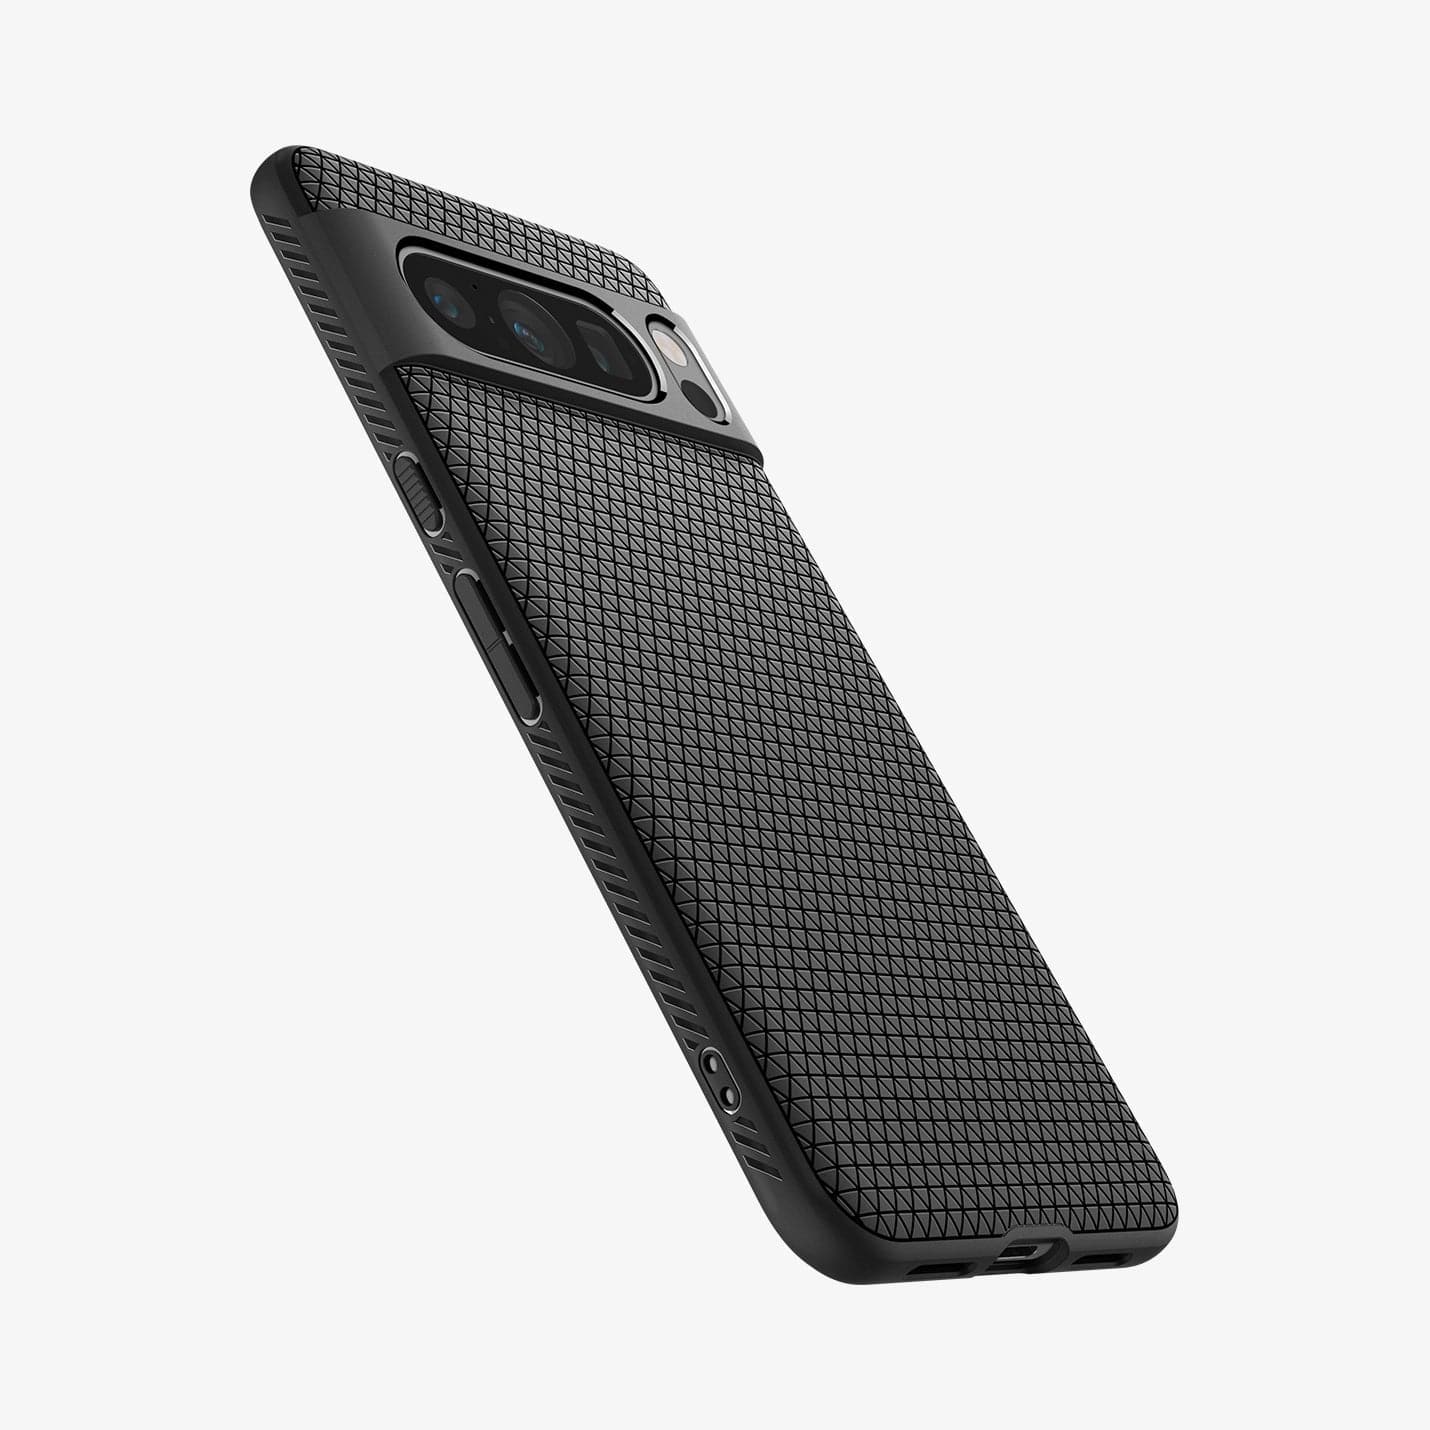 ACS06311 - Pixel 8 Pro Case Liquid Air in matte black showing the back and side